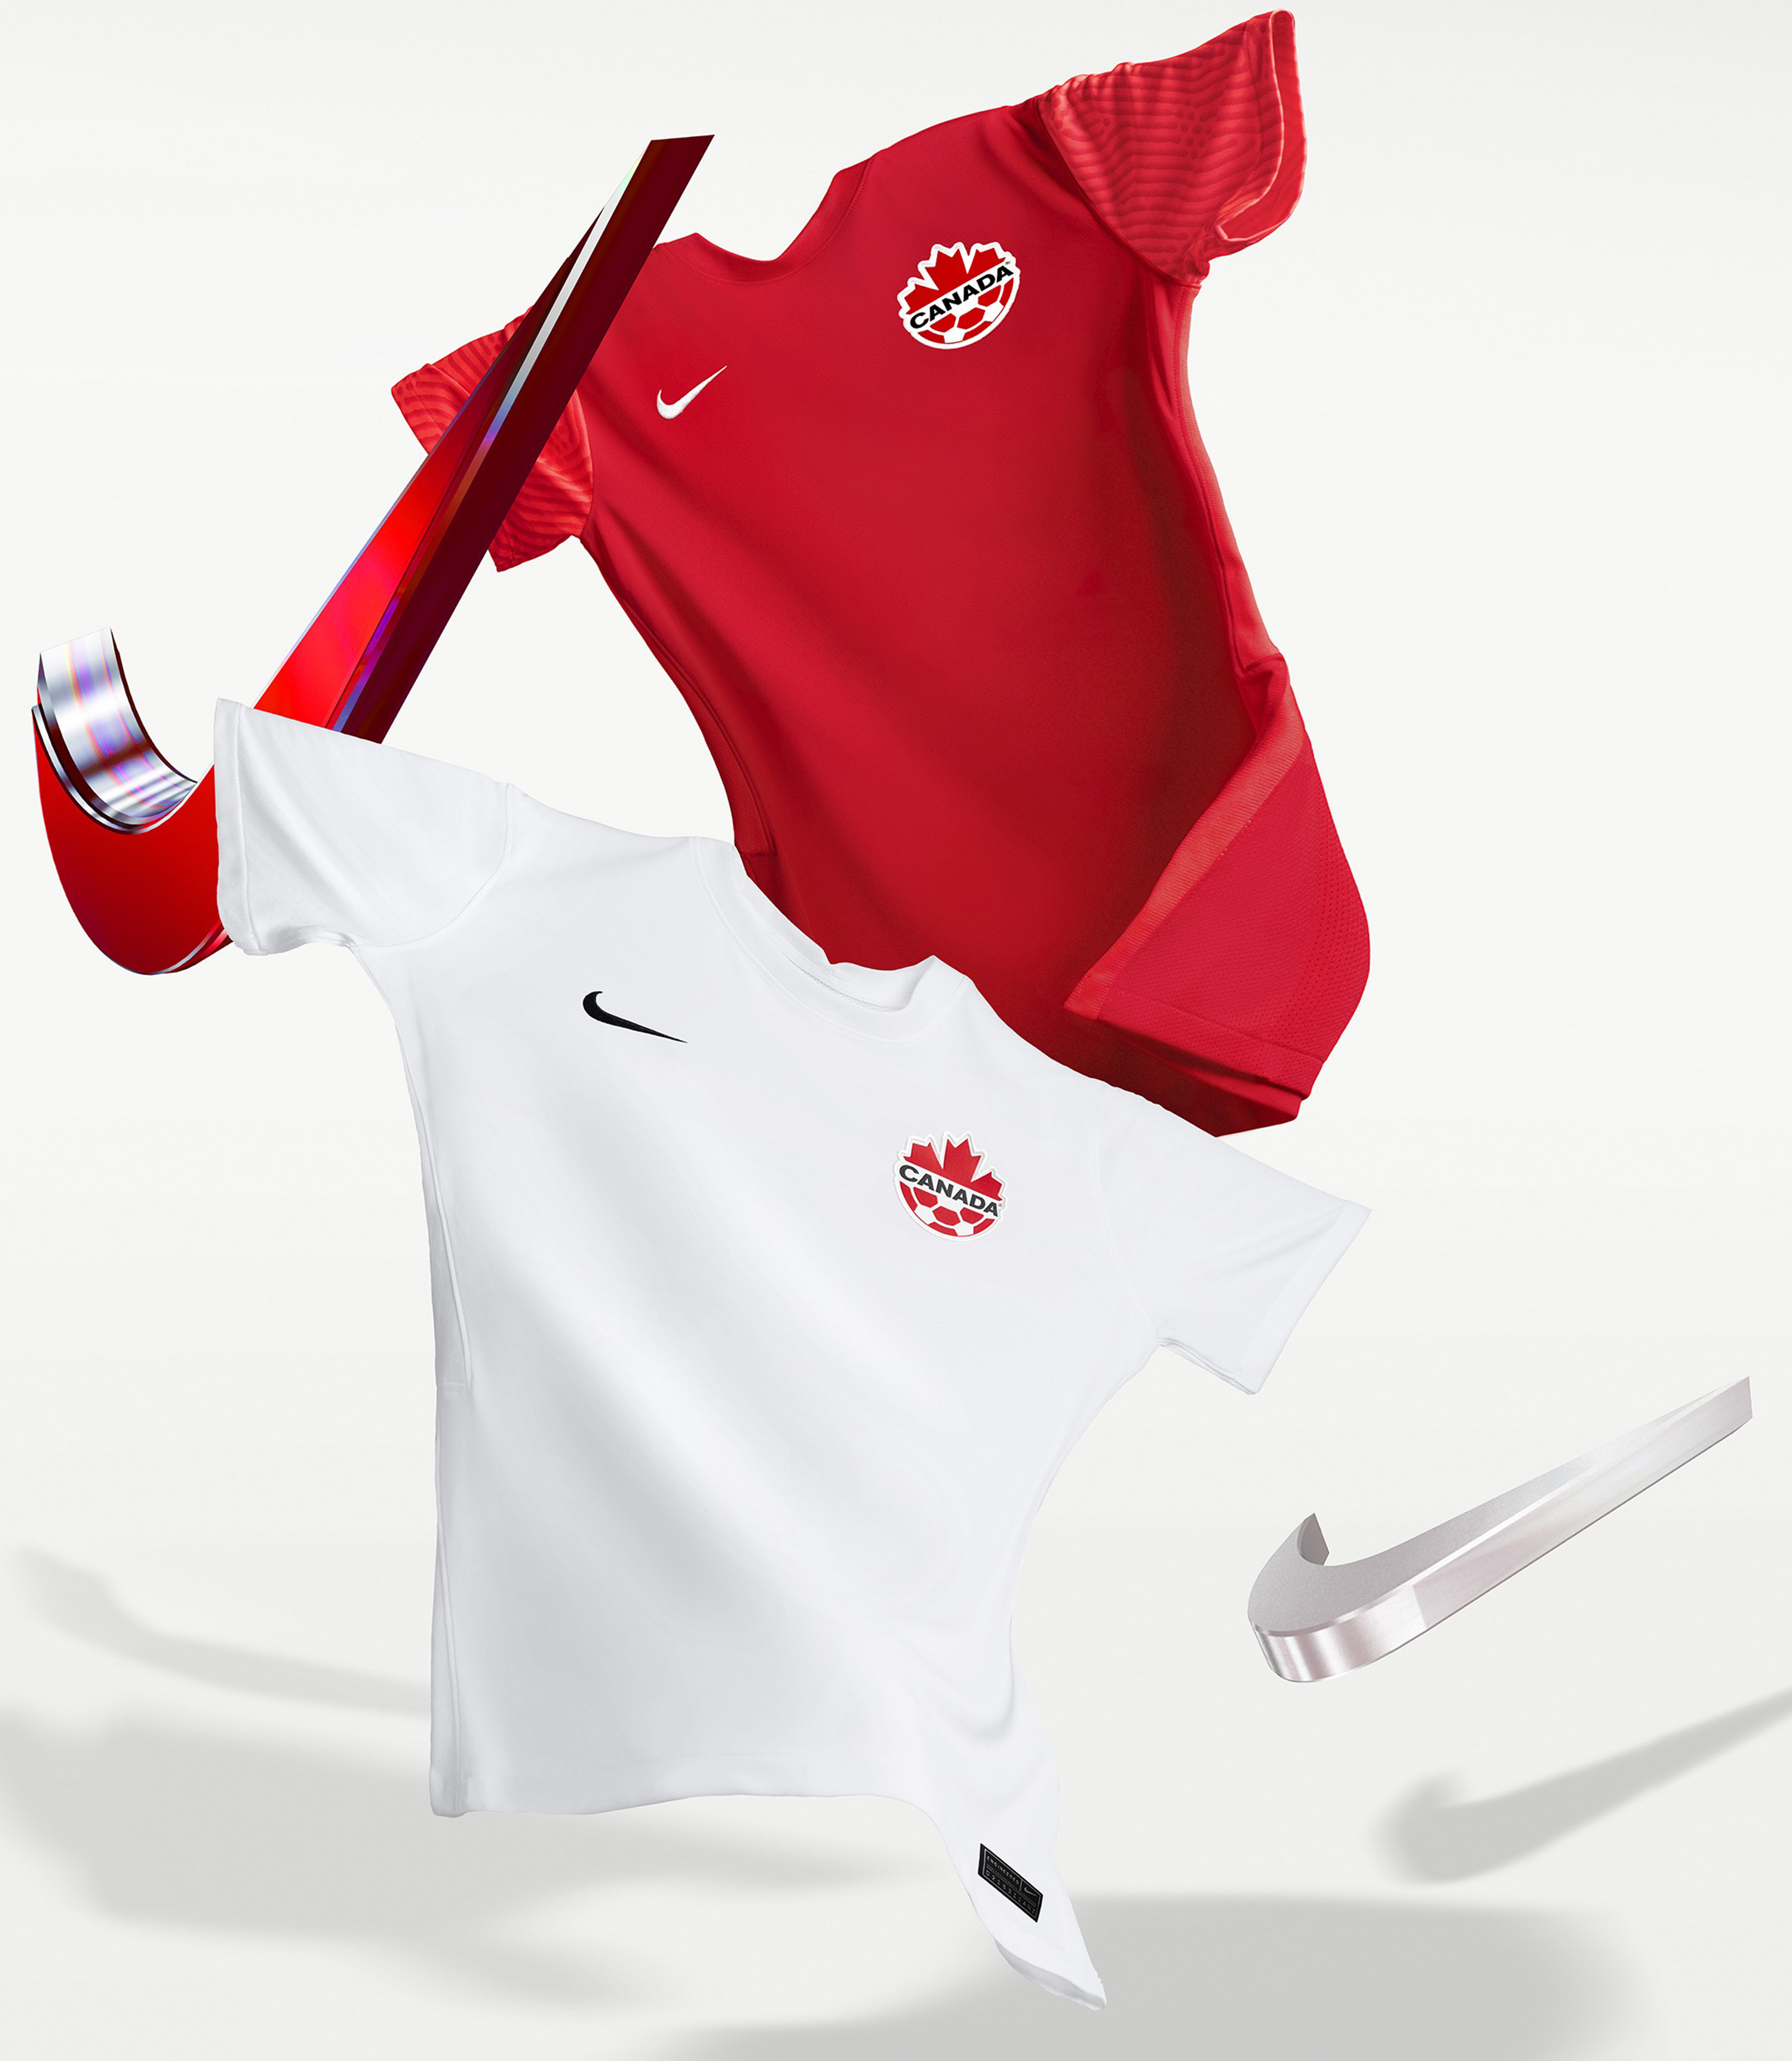 Nike's World Cup kits - United States, Netherlands miss the mark, but  Brazil and Portugal good - ESPN